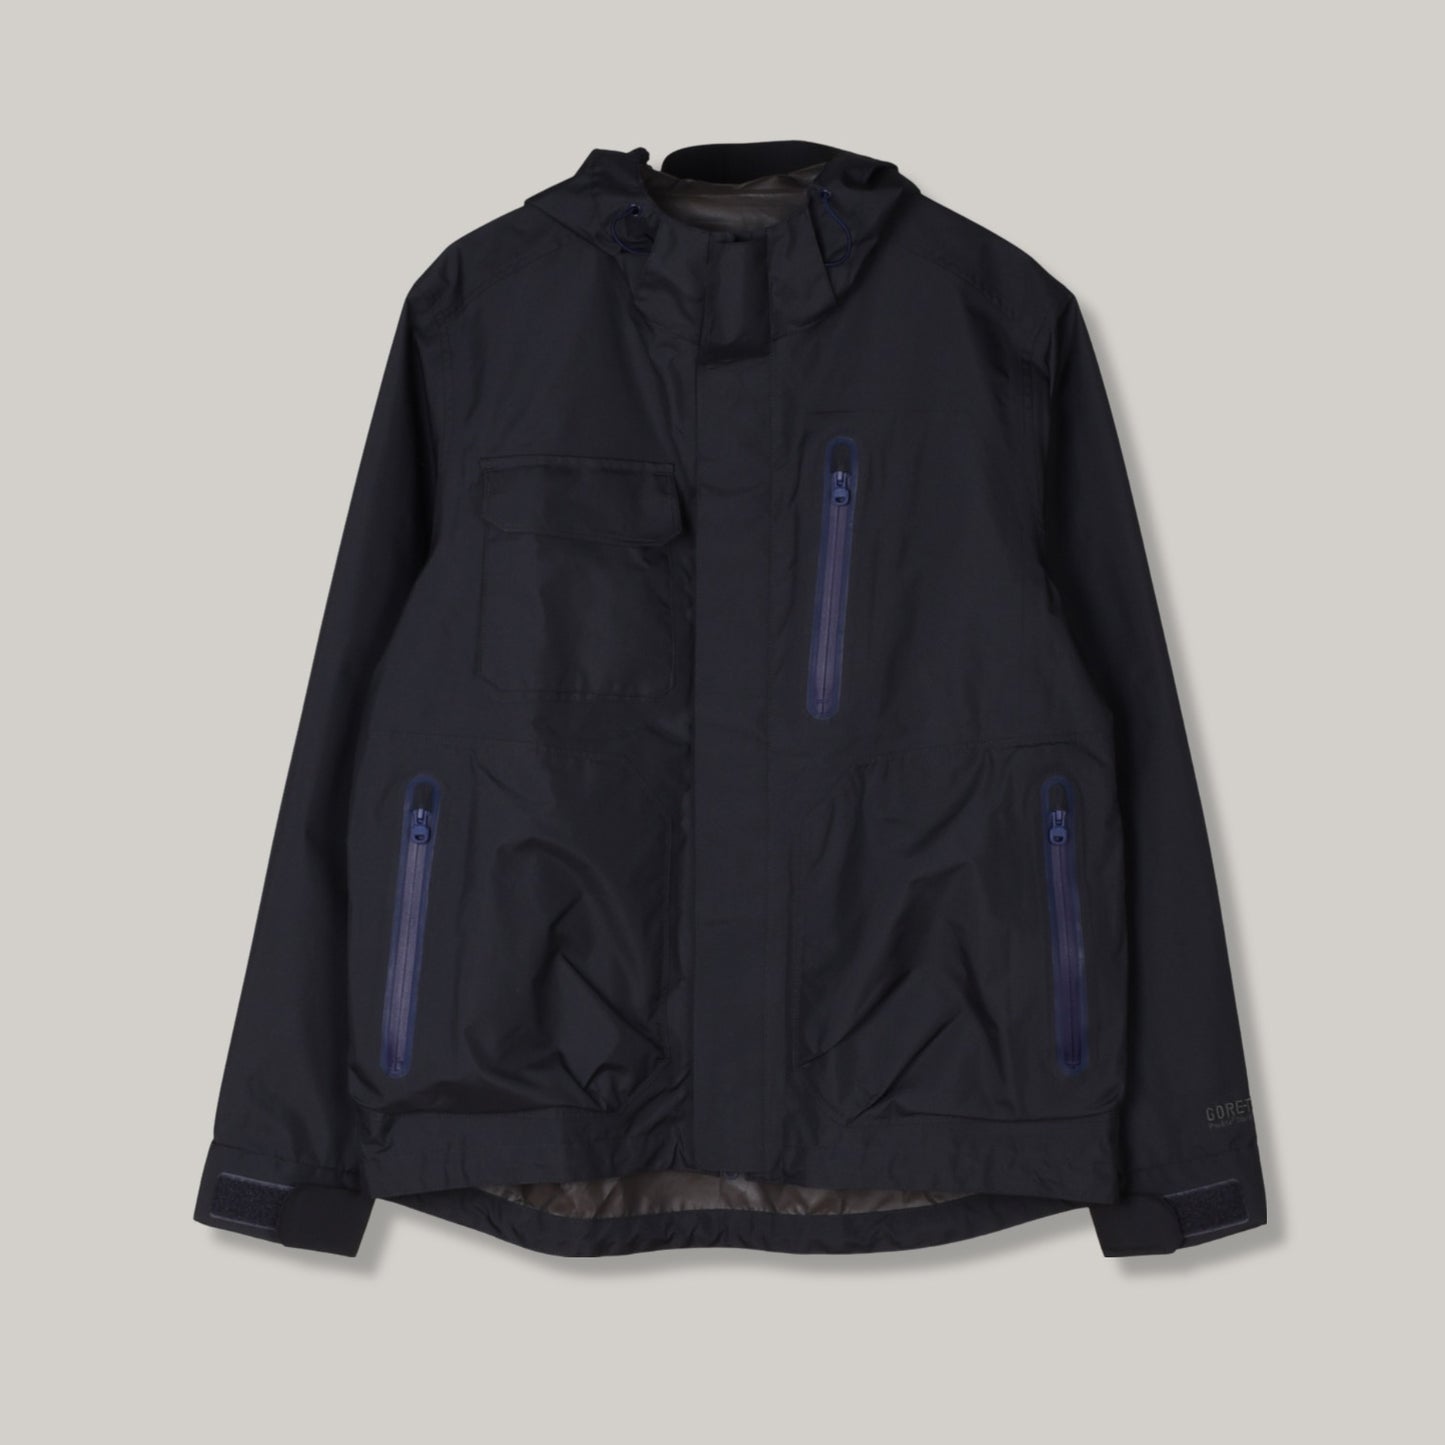 USED WHITE MOUNTAINEERING GORE TEX SHELL JACKET - NAVY